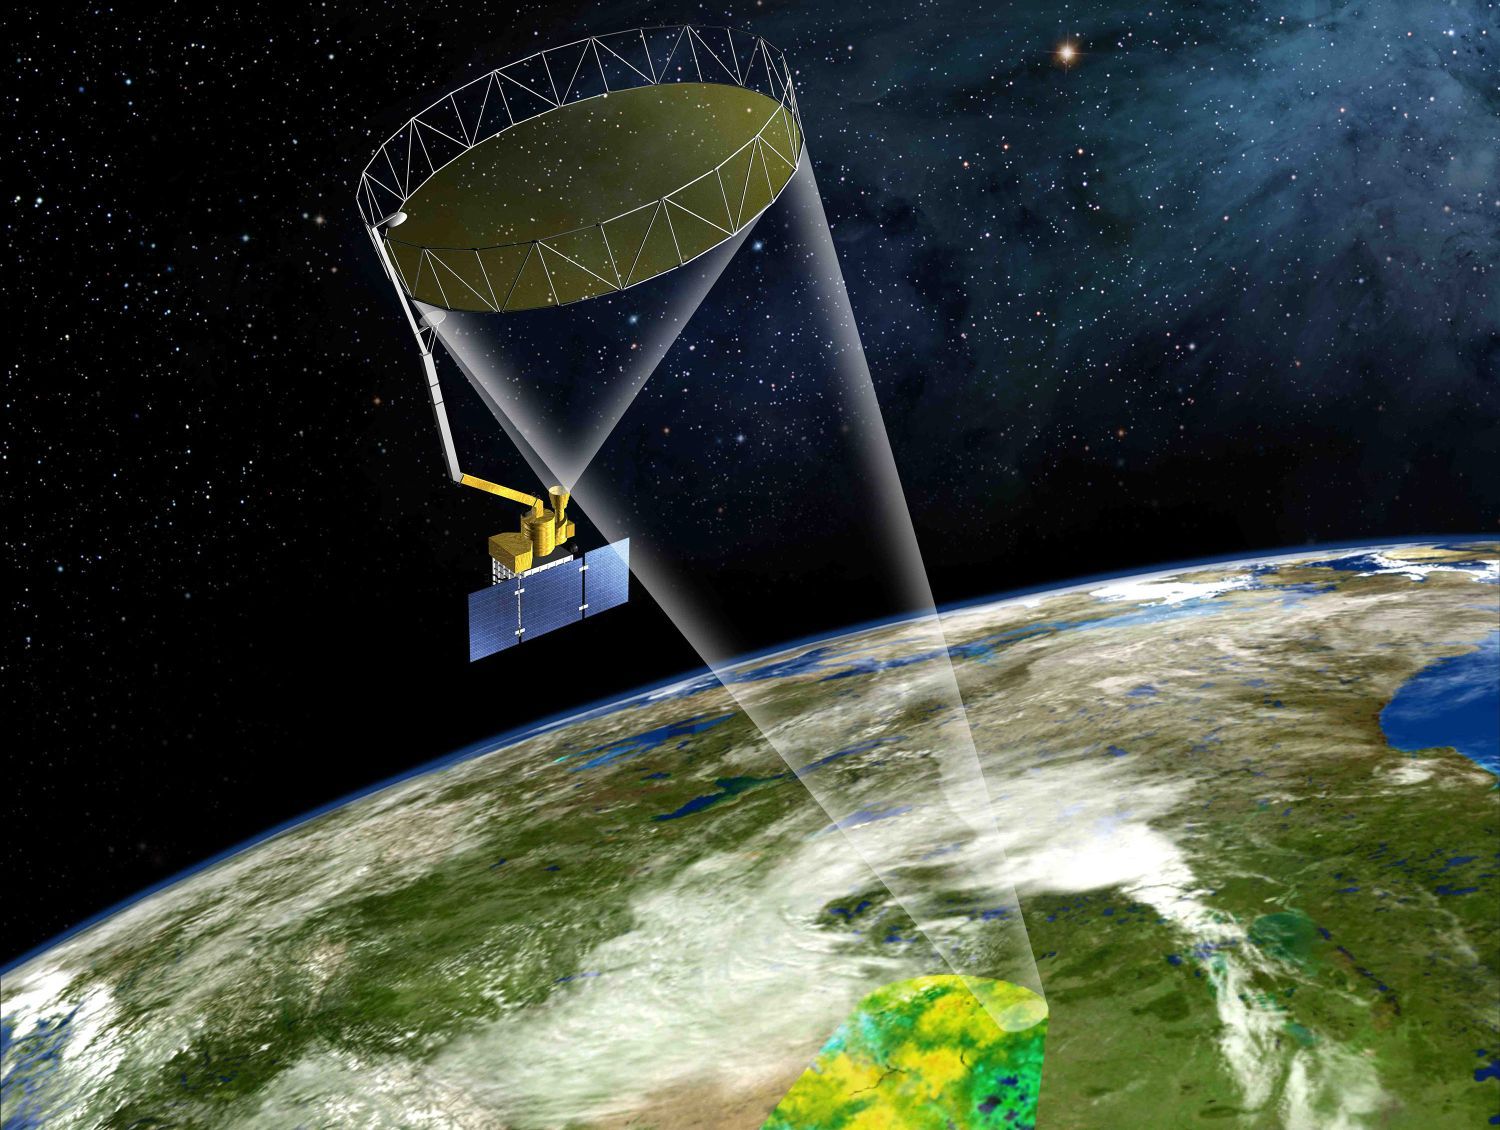 Scheduled for launch in early 2015, NASA's Soil Moisture Active Passive, or SMAP mission, will track Earth's water into one of its last hiding places: the soil. SMAP soil moisture data will, among other things, aid in predictions of agricultural productivity, weather and climate. Image Credit: NASA